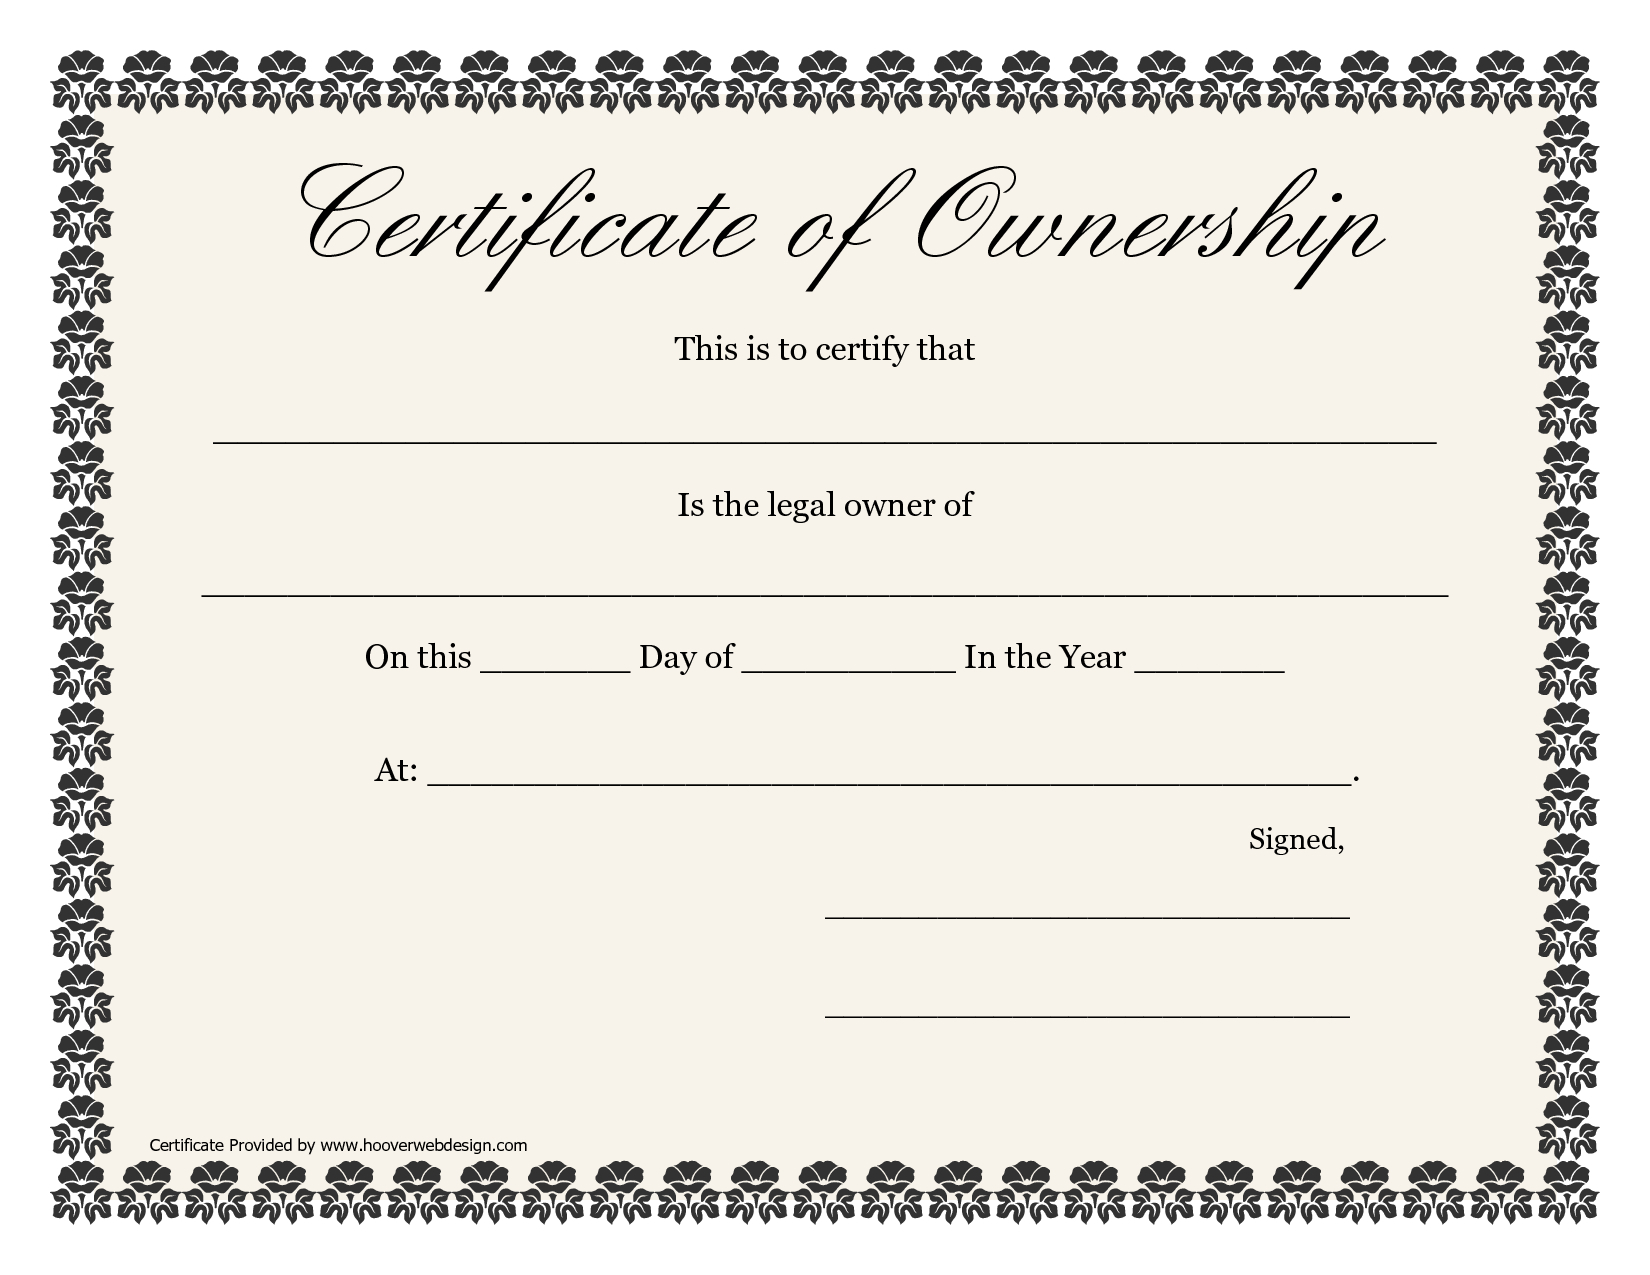 ❤️5+ Free Sample Of Certificate Of Ownership Form Template❤️ Within Ownership Certificate Template